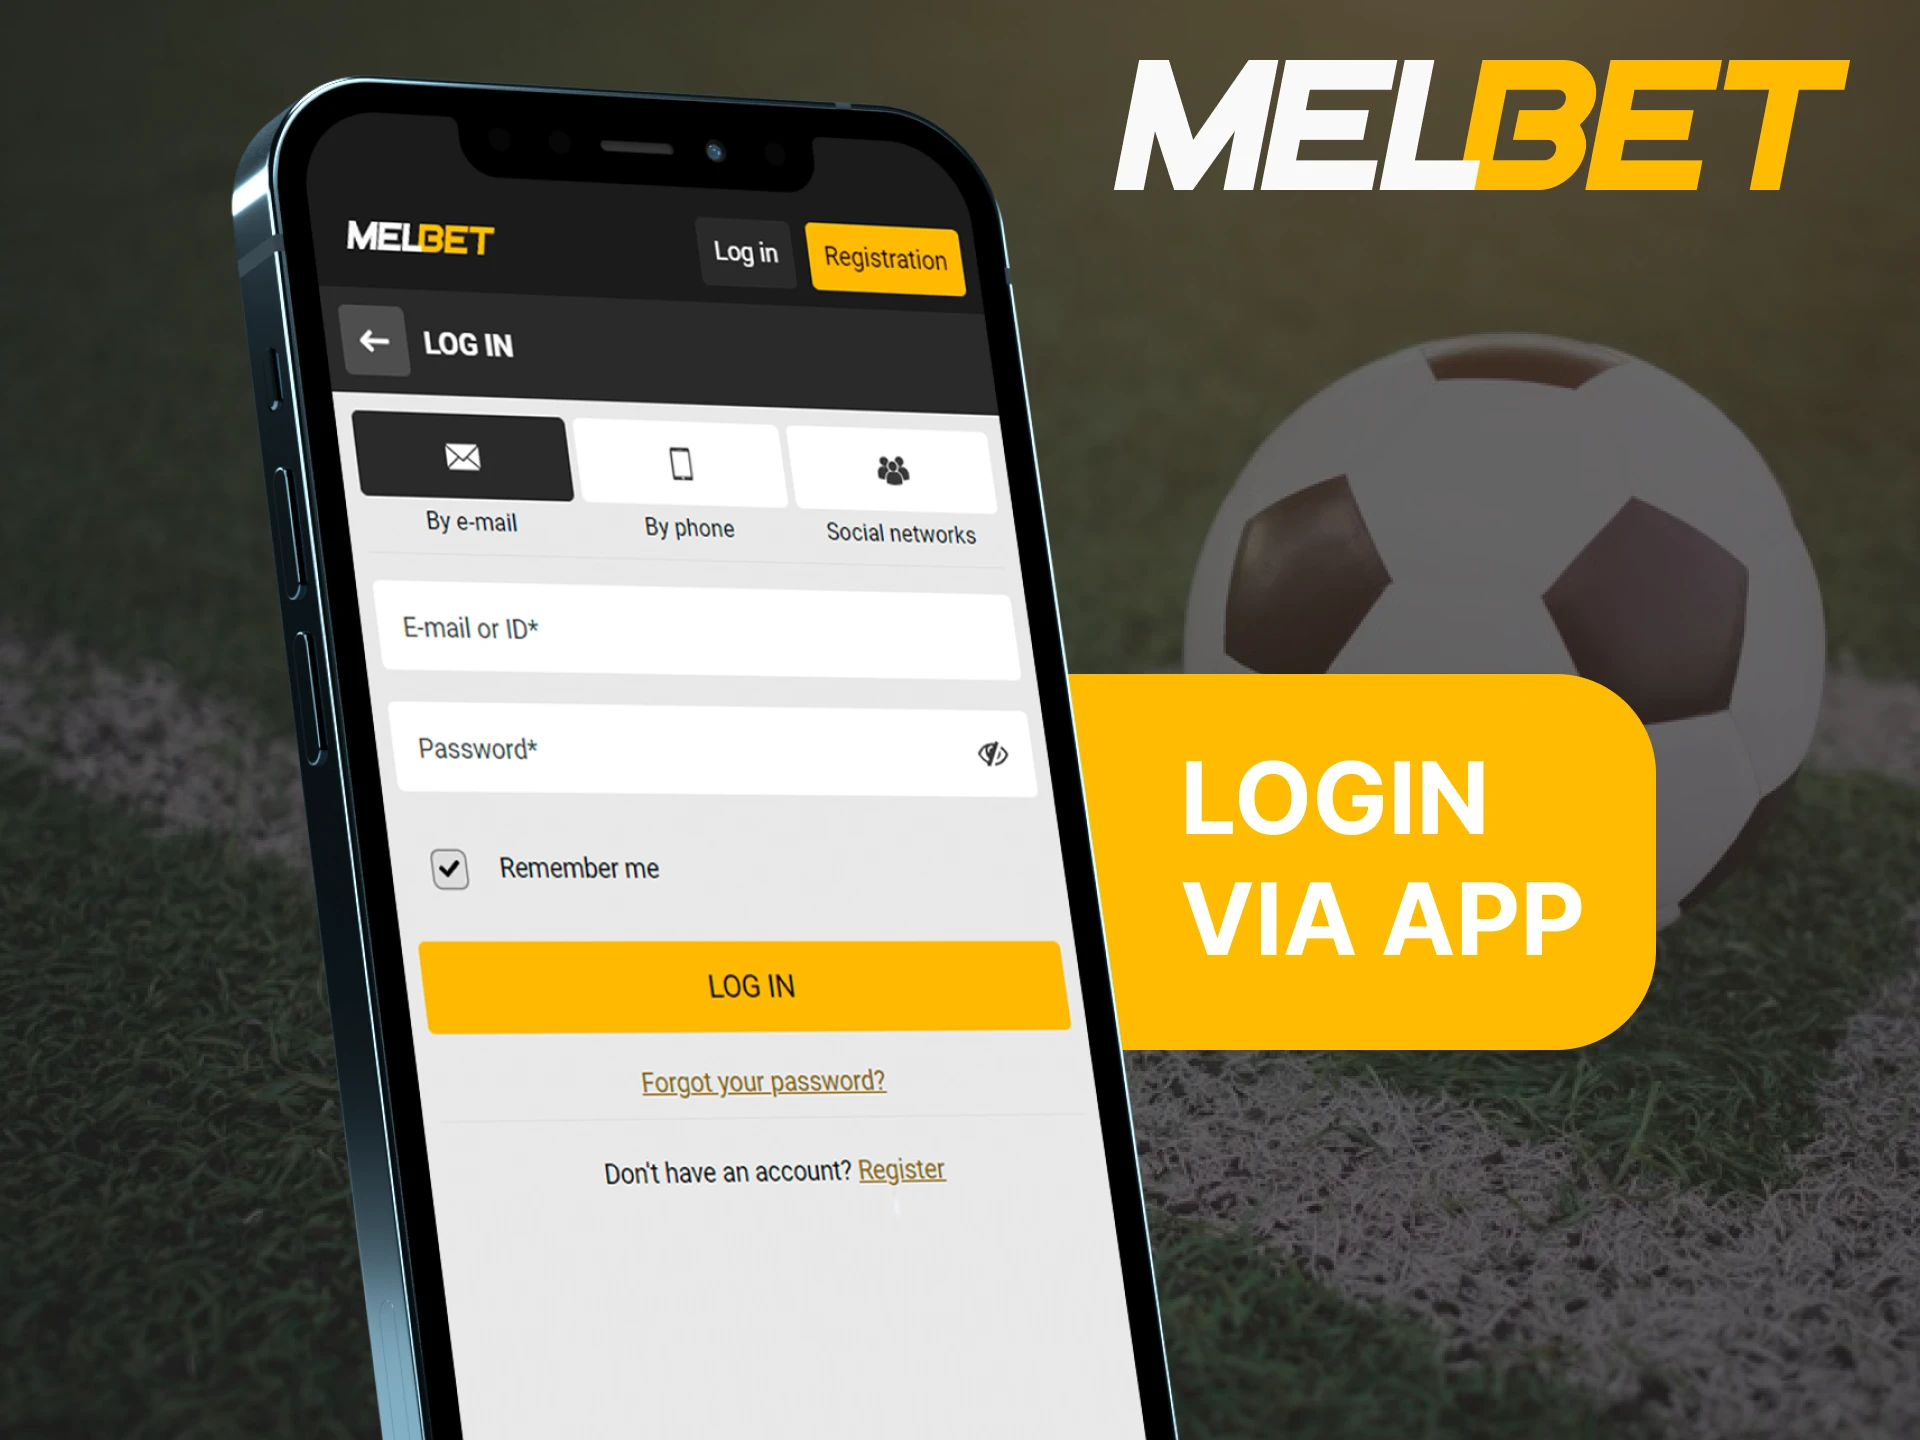 Log into your Melbet account using the mobile app if you already have an account.